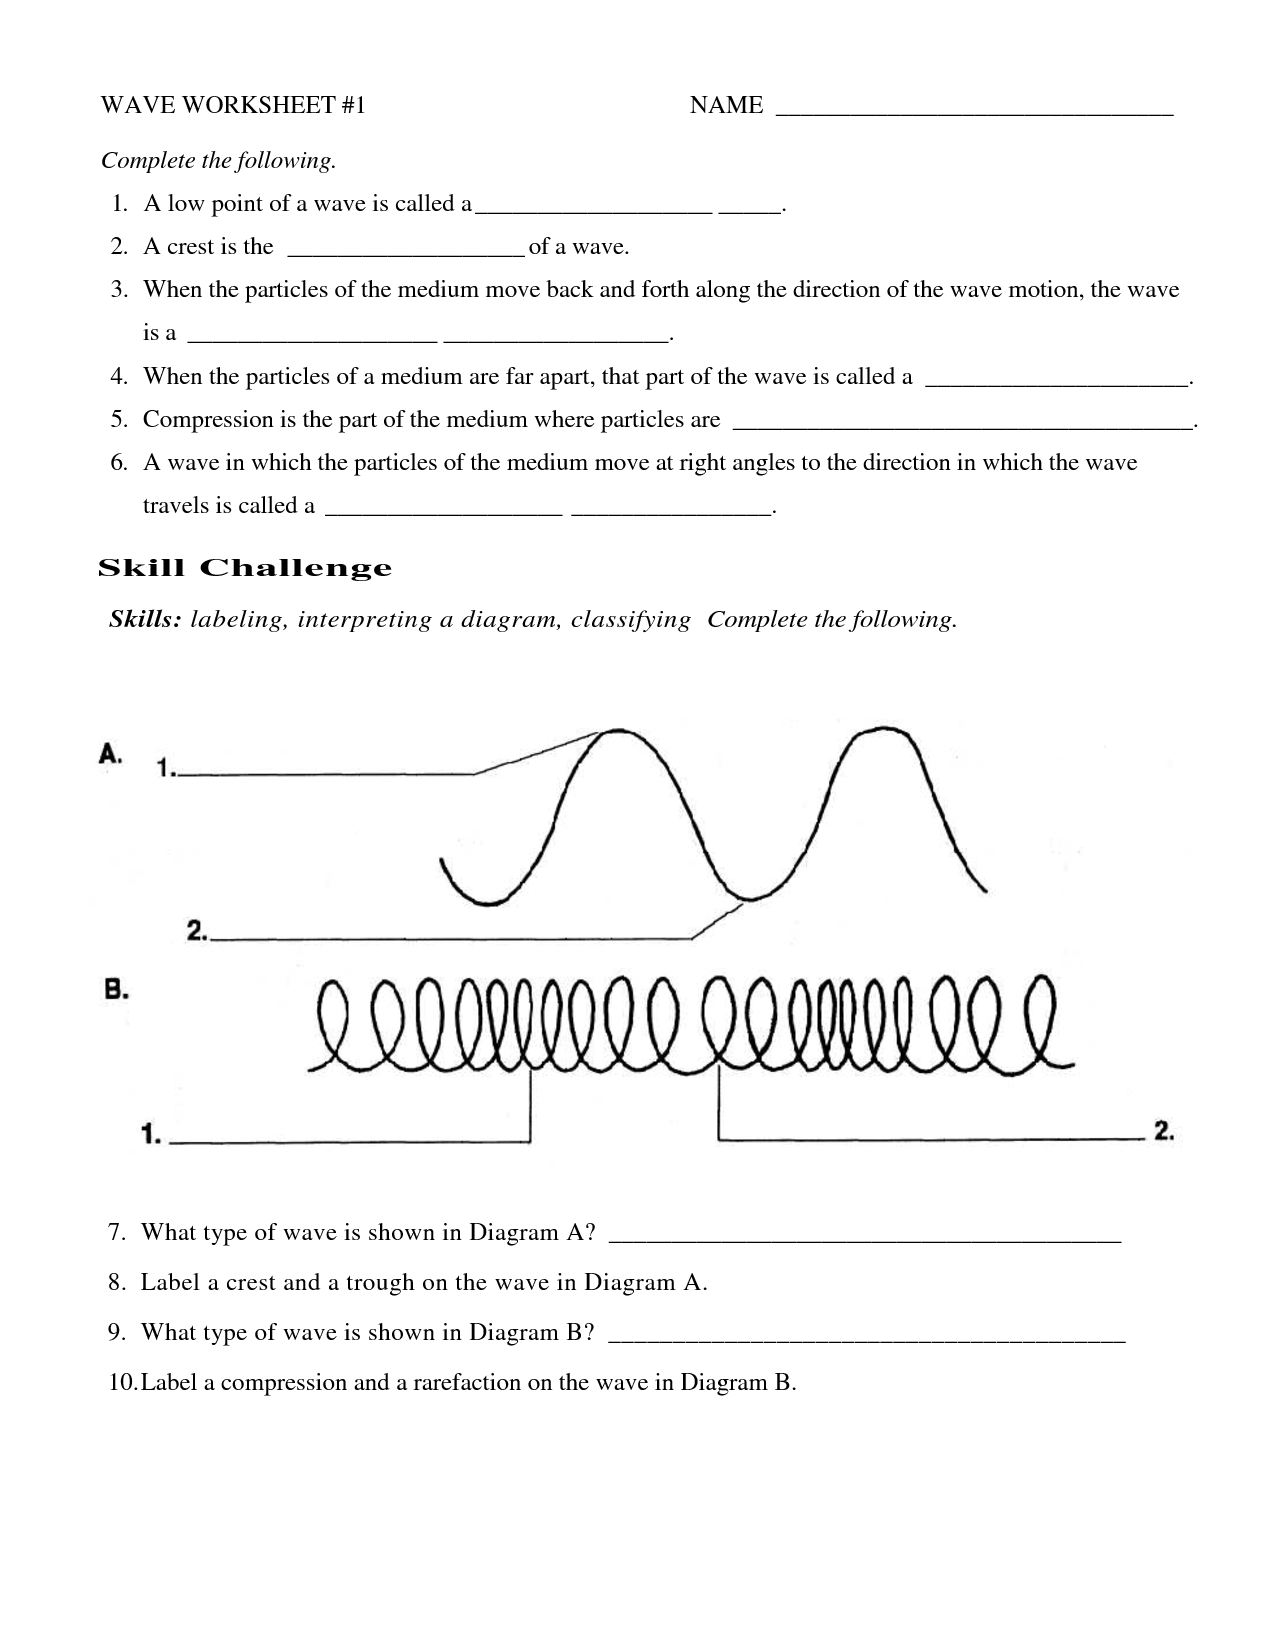 Wave Speed Equation Practice Problems Key Answers Anatomy Of A Wave Worksheet Answers The 